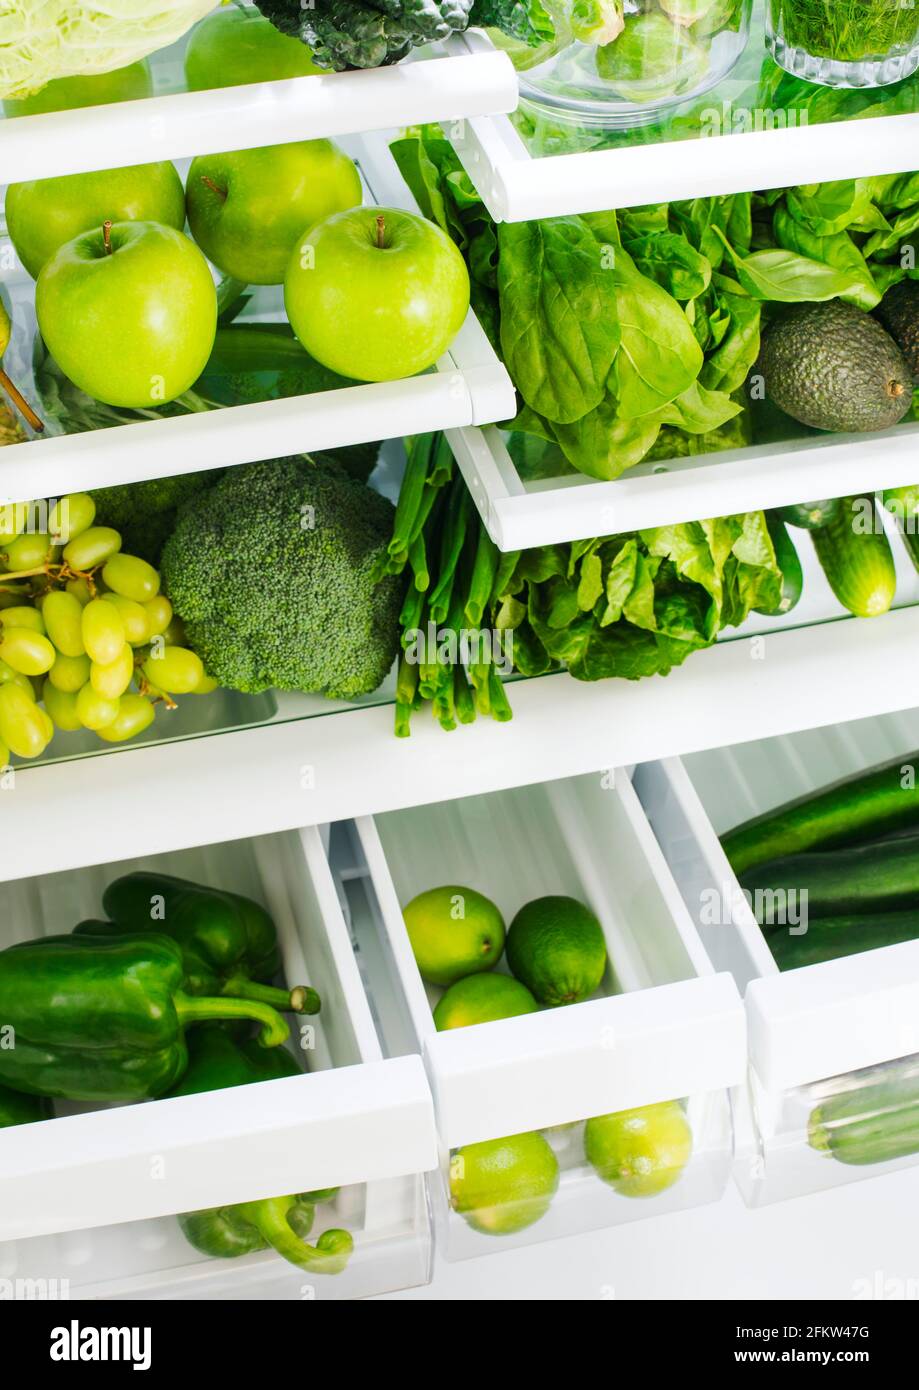 Fresh green vegetables and fruits in fridge. Stock Photo